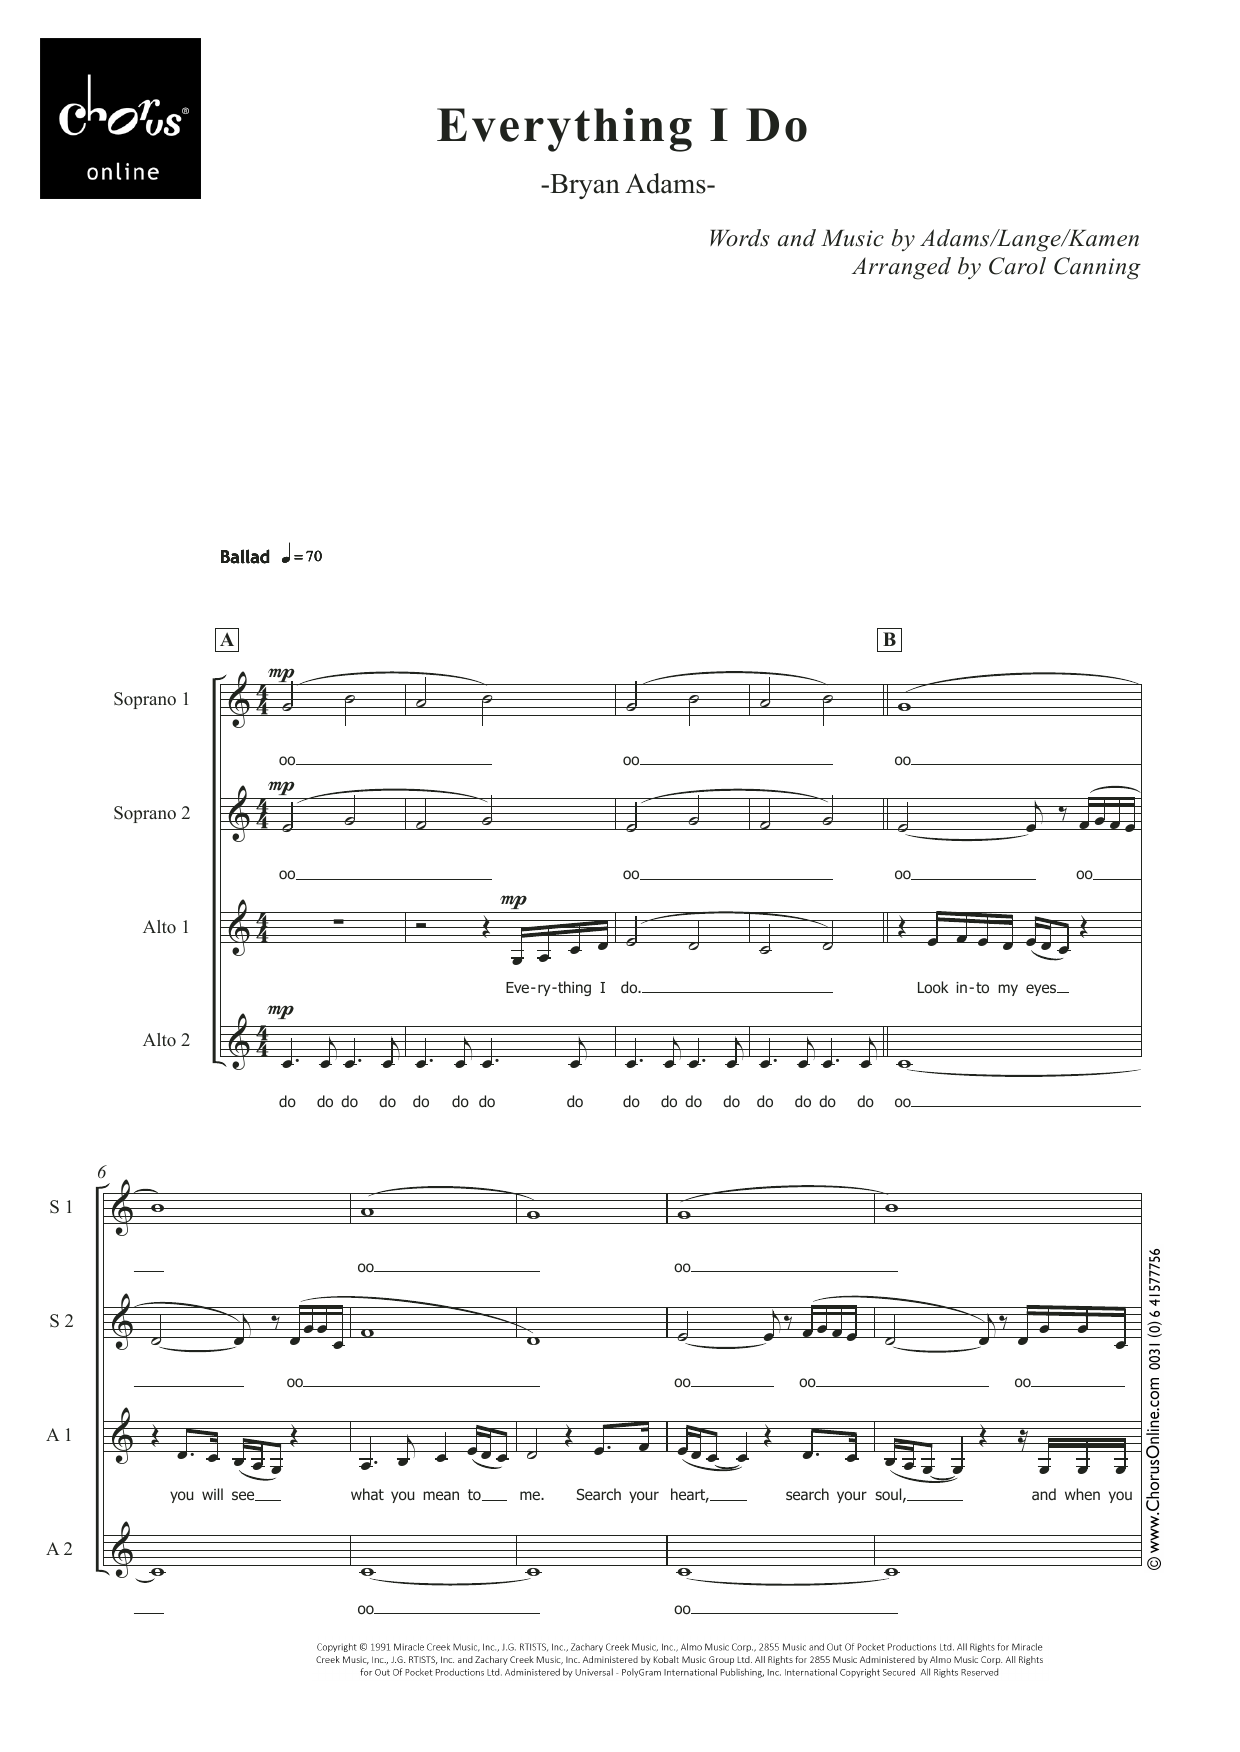 Bryan Adams (Everything I Do) I Do It for You (arr. Carol Canning) sheet music notes printable PDF score